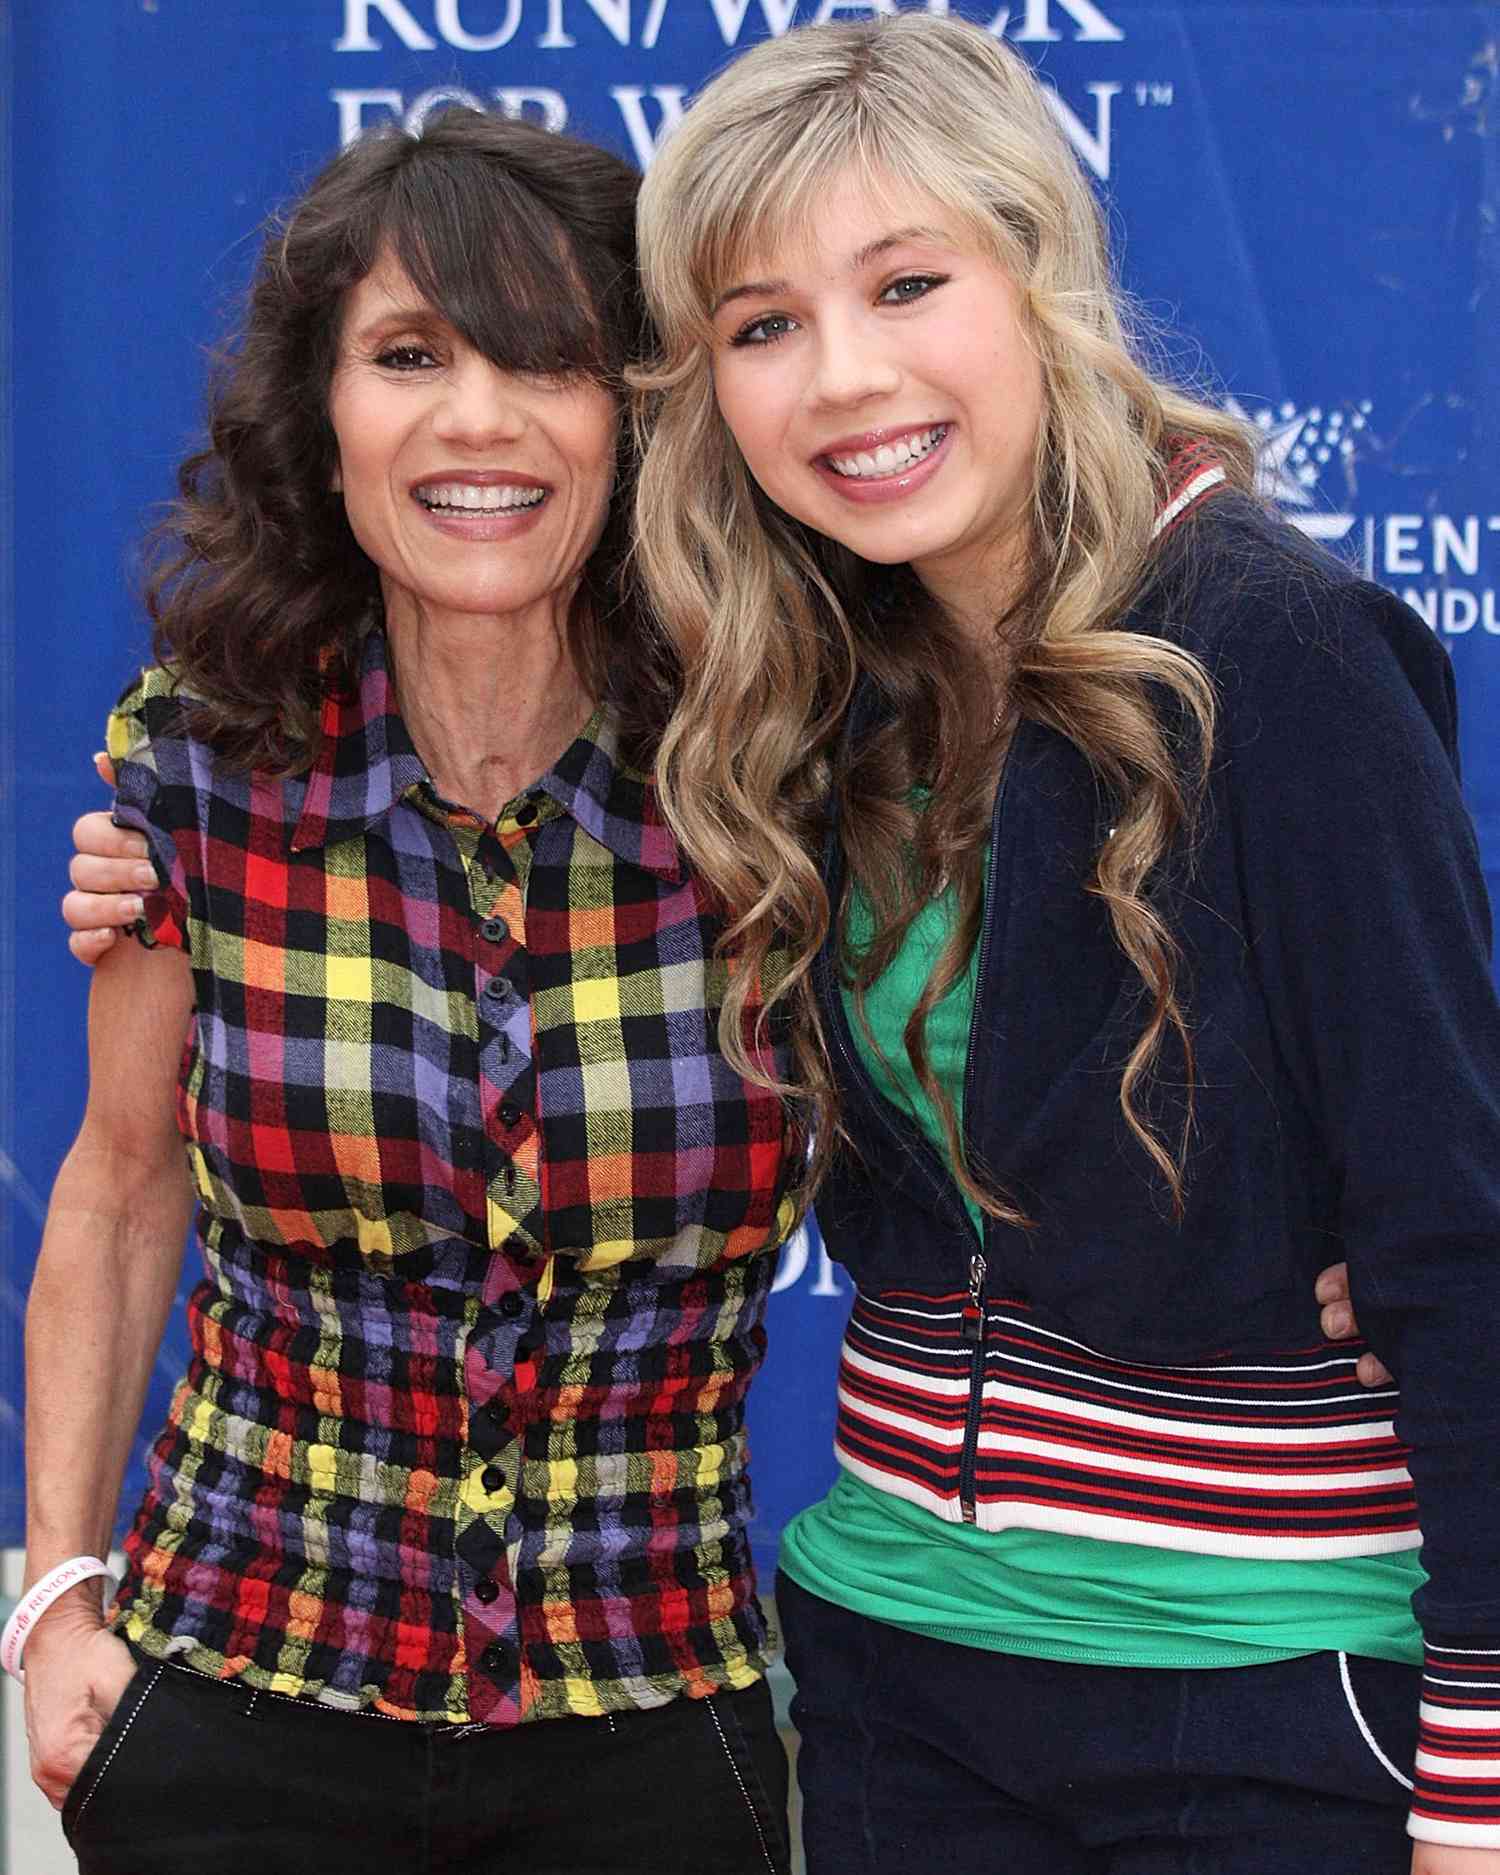 McCurdy Is 'Grateful' 1 Year After Memoir on Abusive Mom